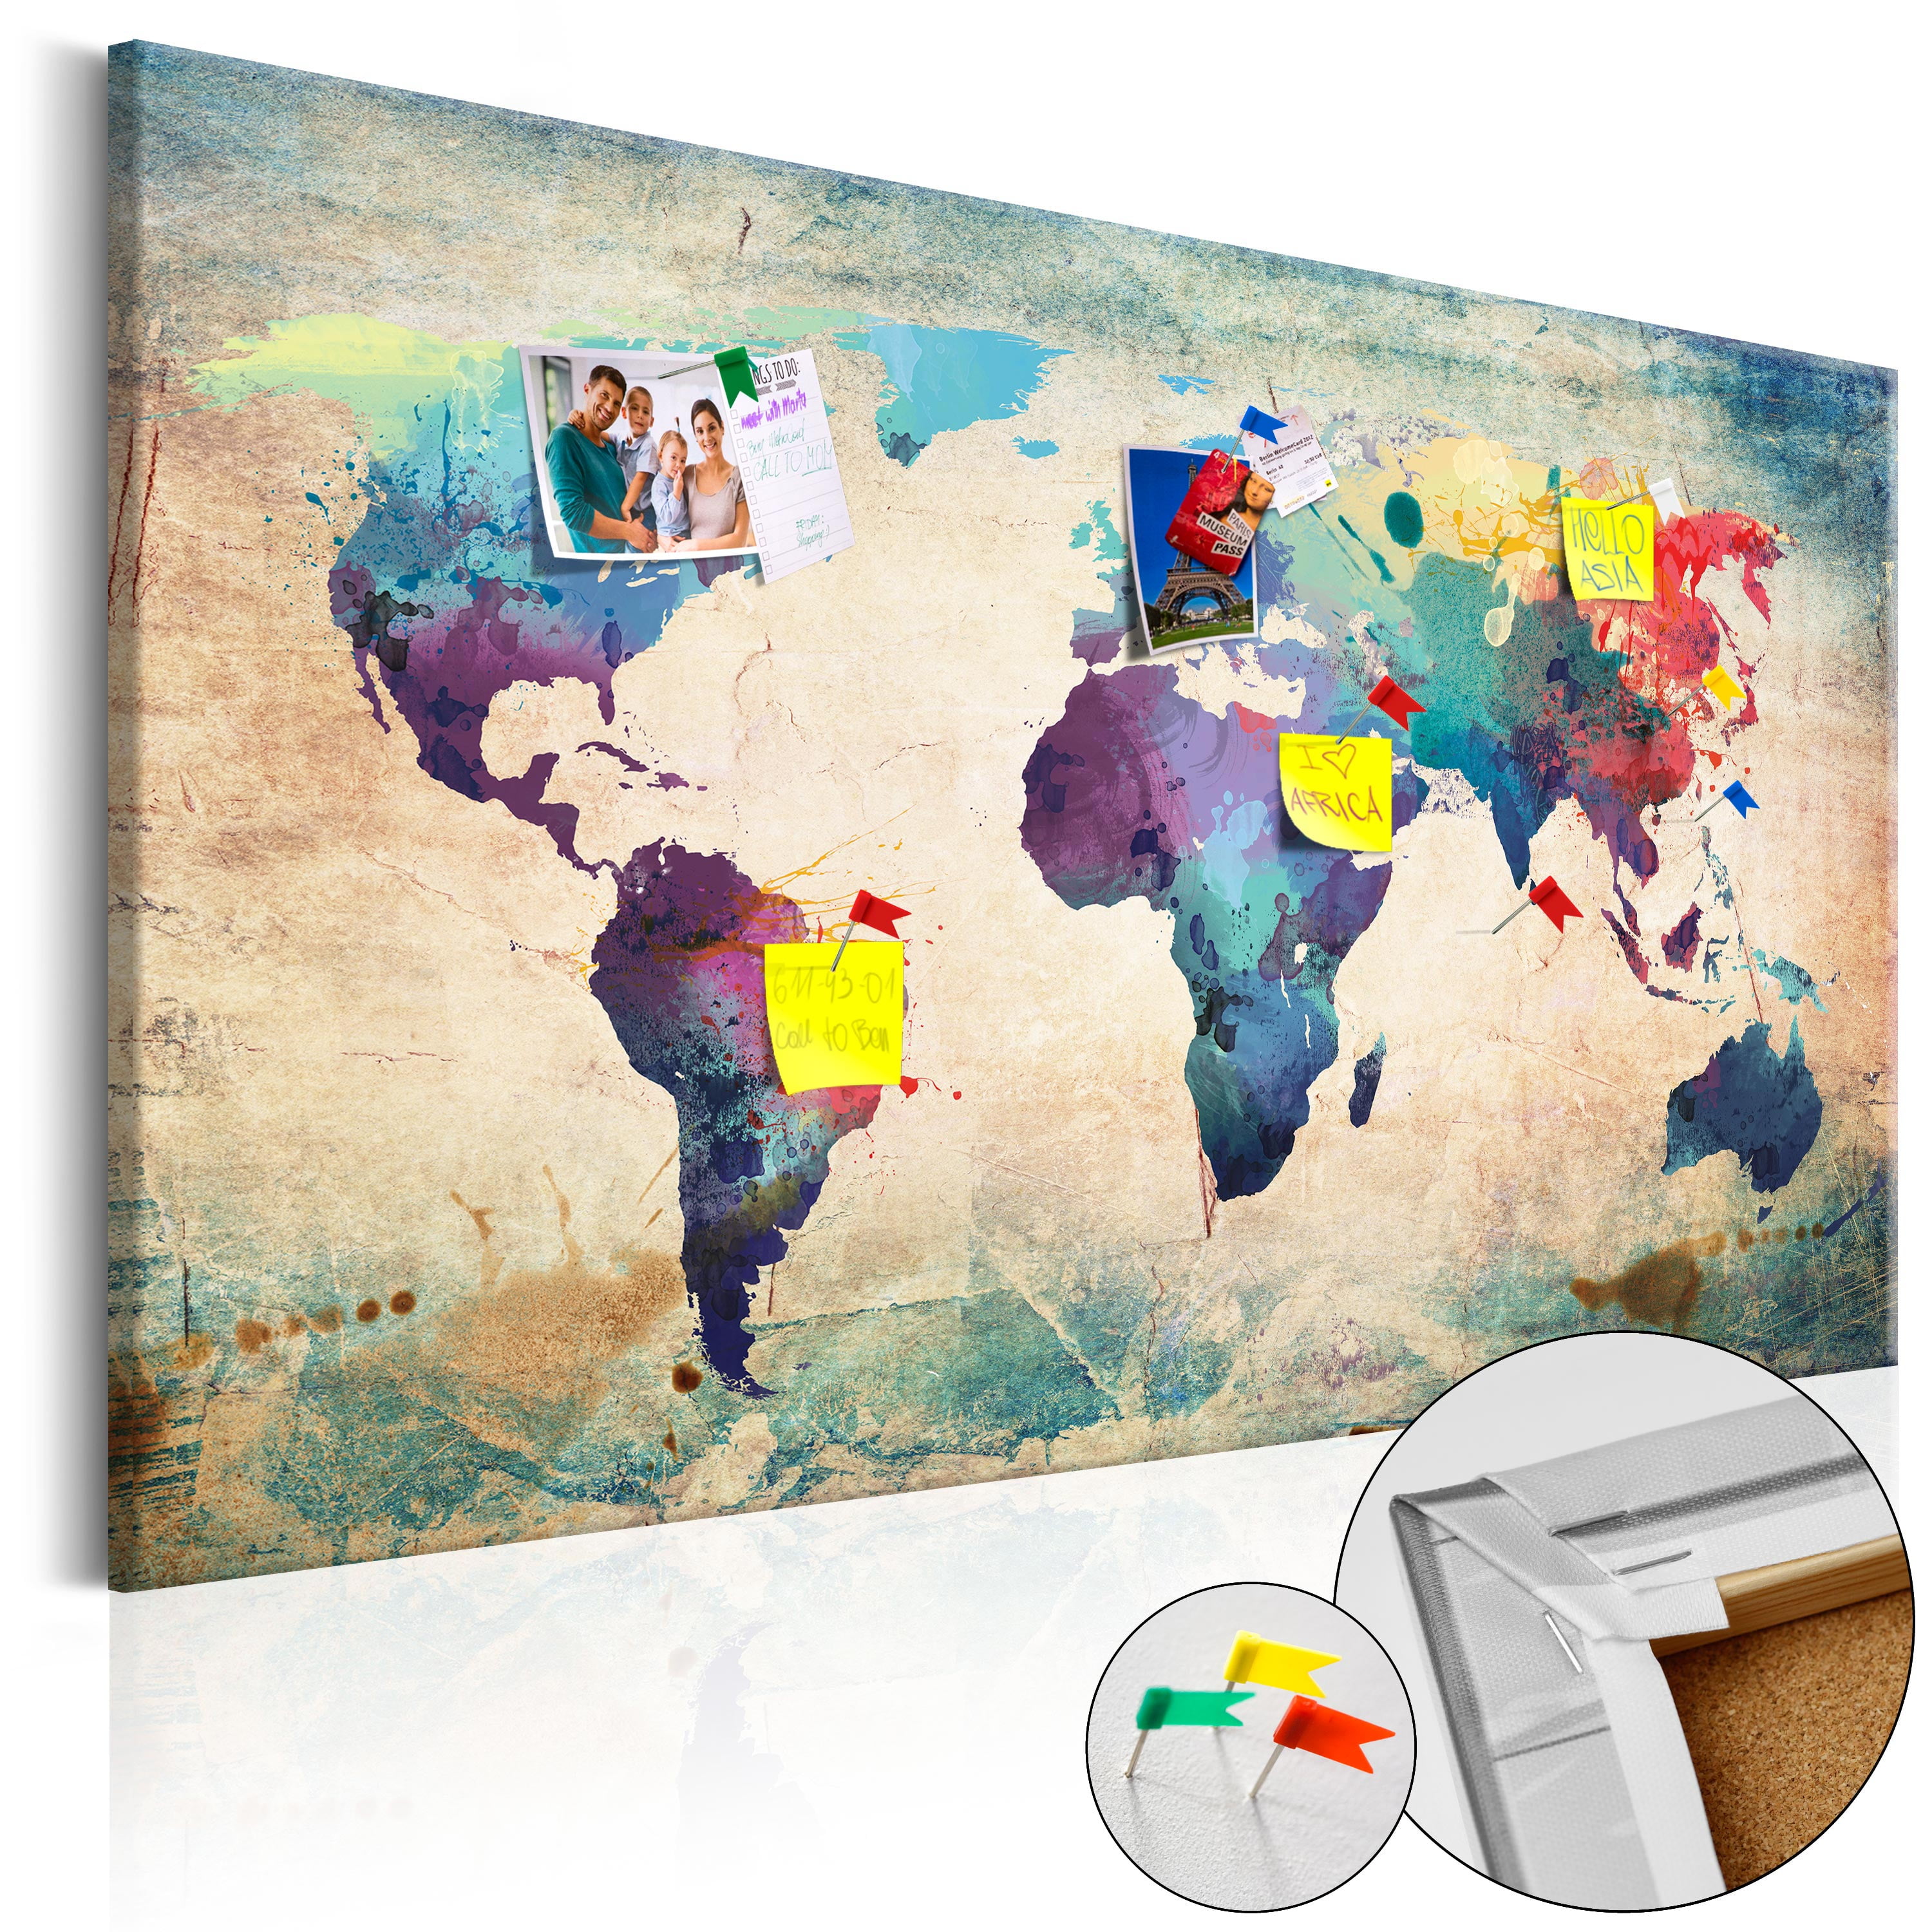 artgeist Pinboard World Map 35x24 in - Cork Board & Canvas Print Wall Art 1  pcs Memoboard with 50 Pins Noticeboard Message Board Image Picture Home